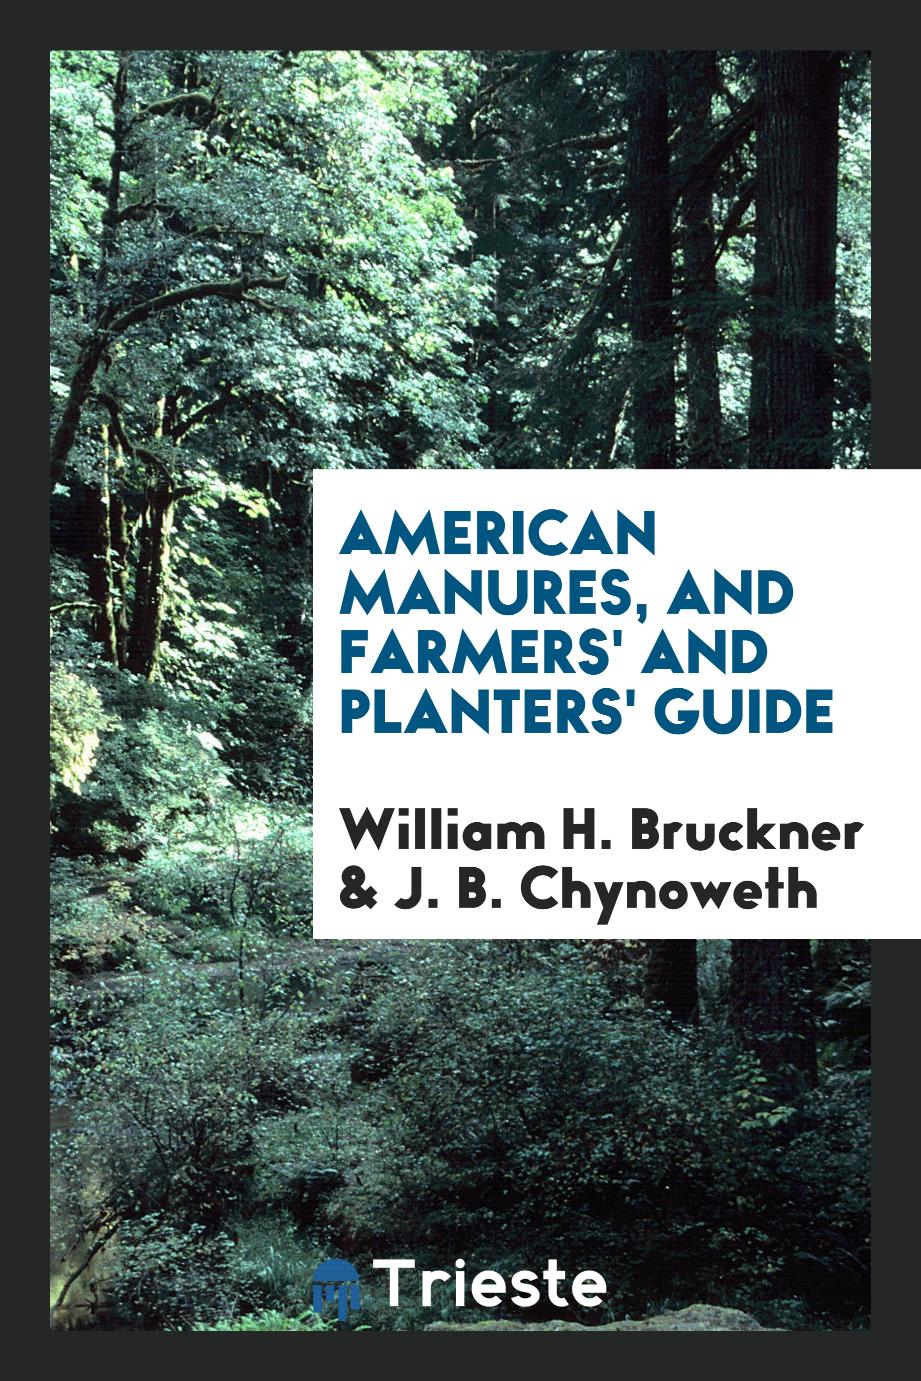 American manures, and farmers' and planters' guide